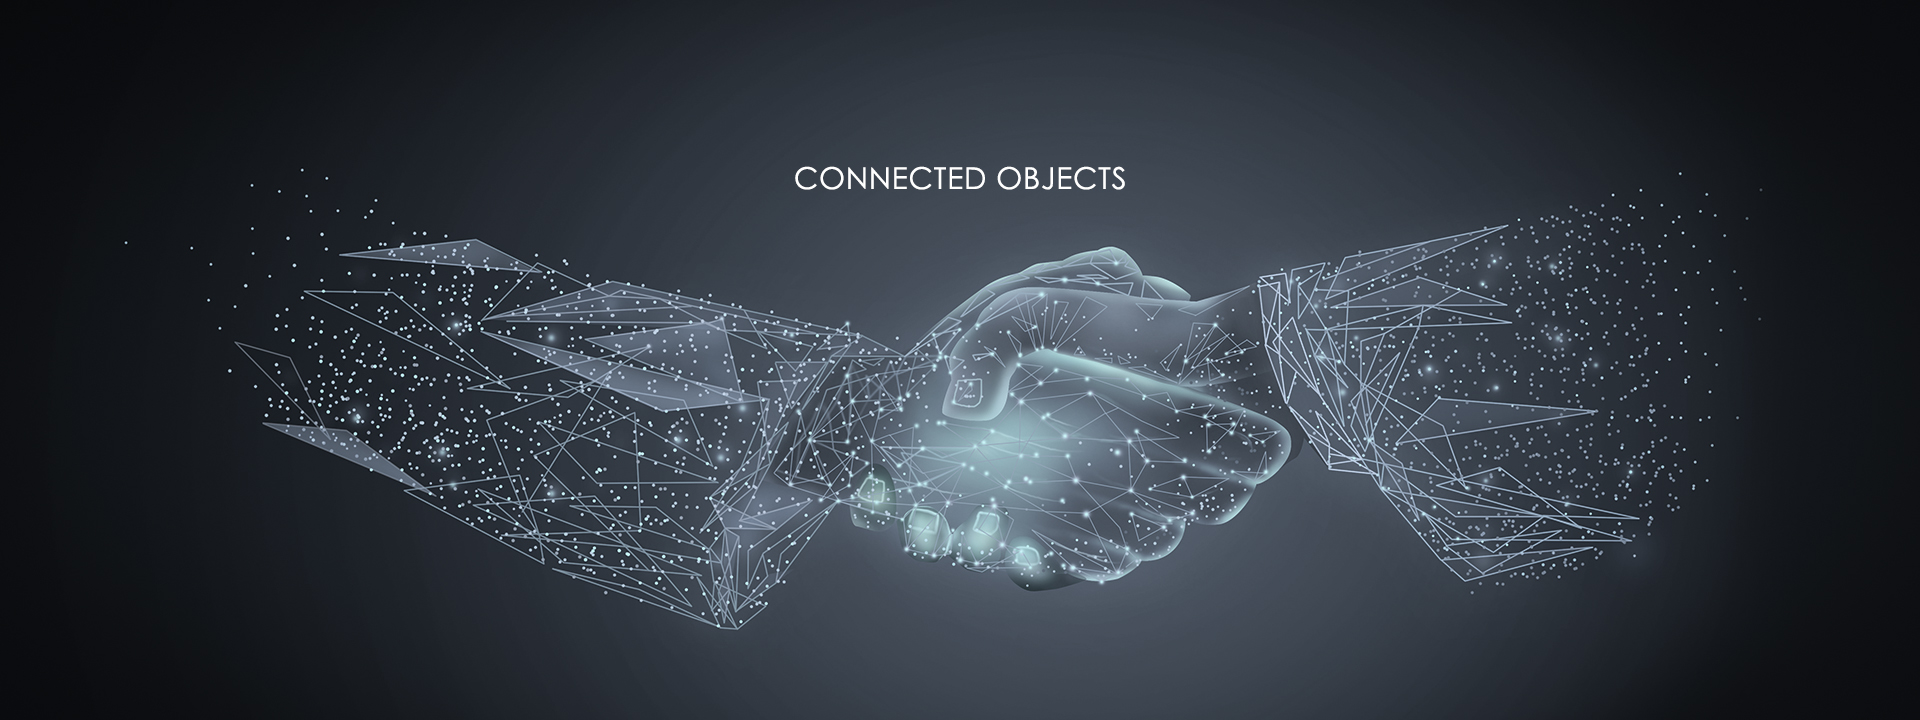 Connected Objects